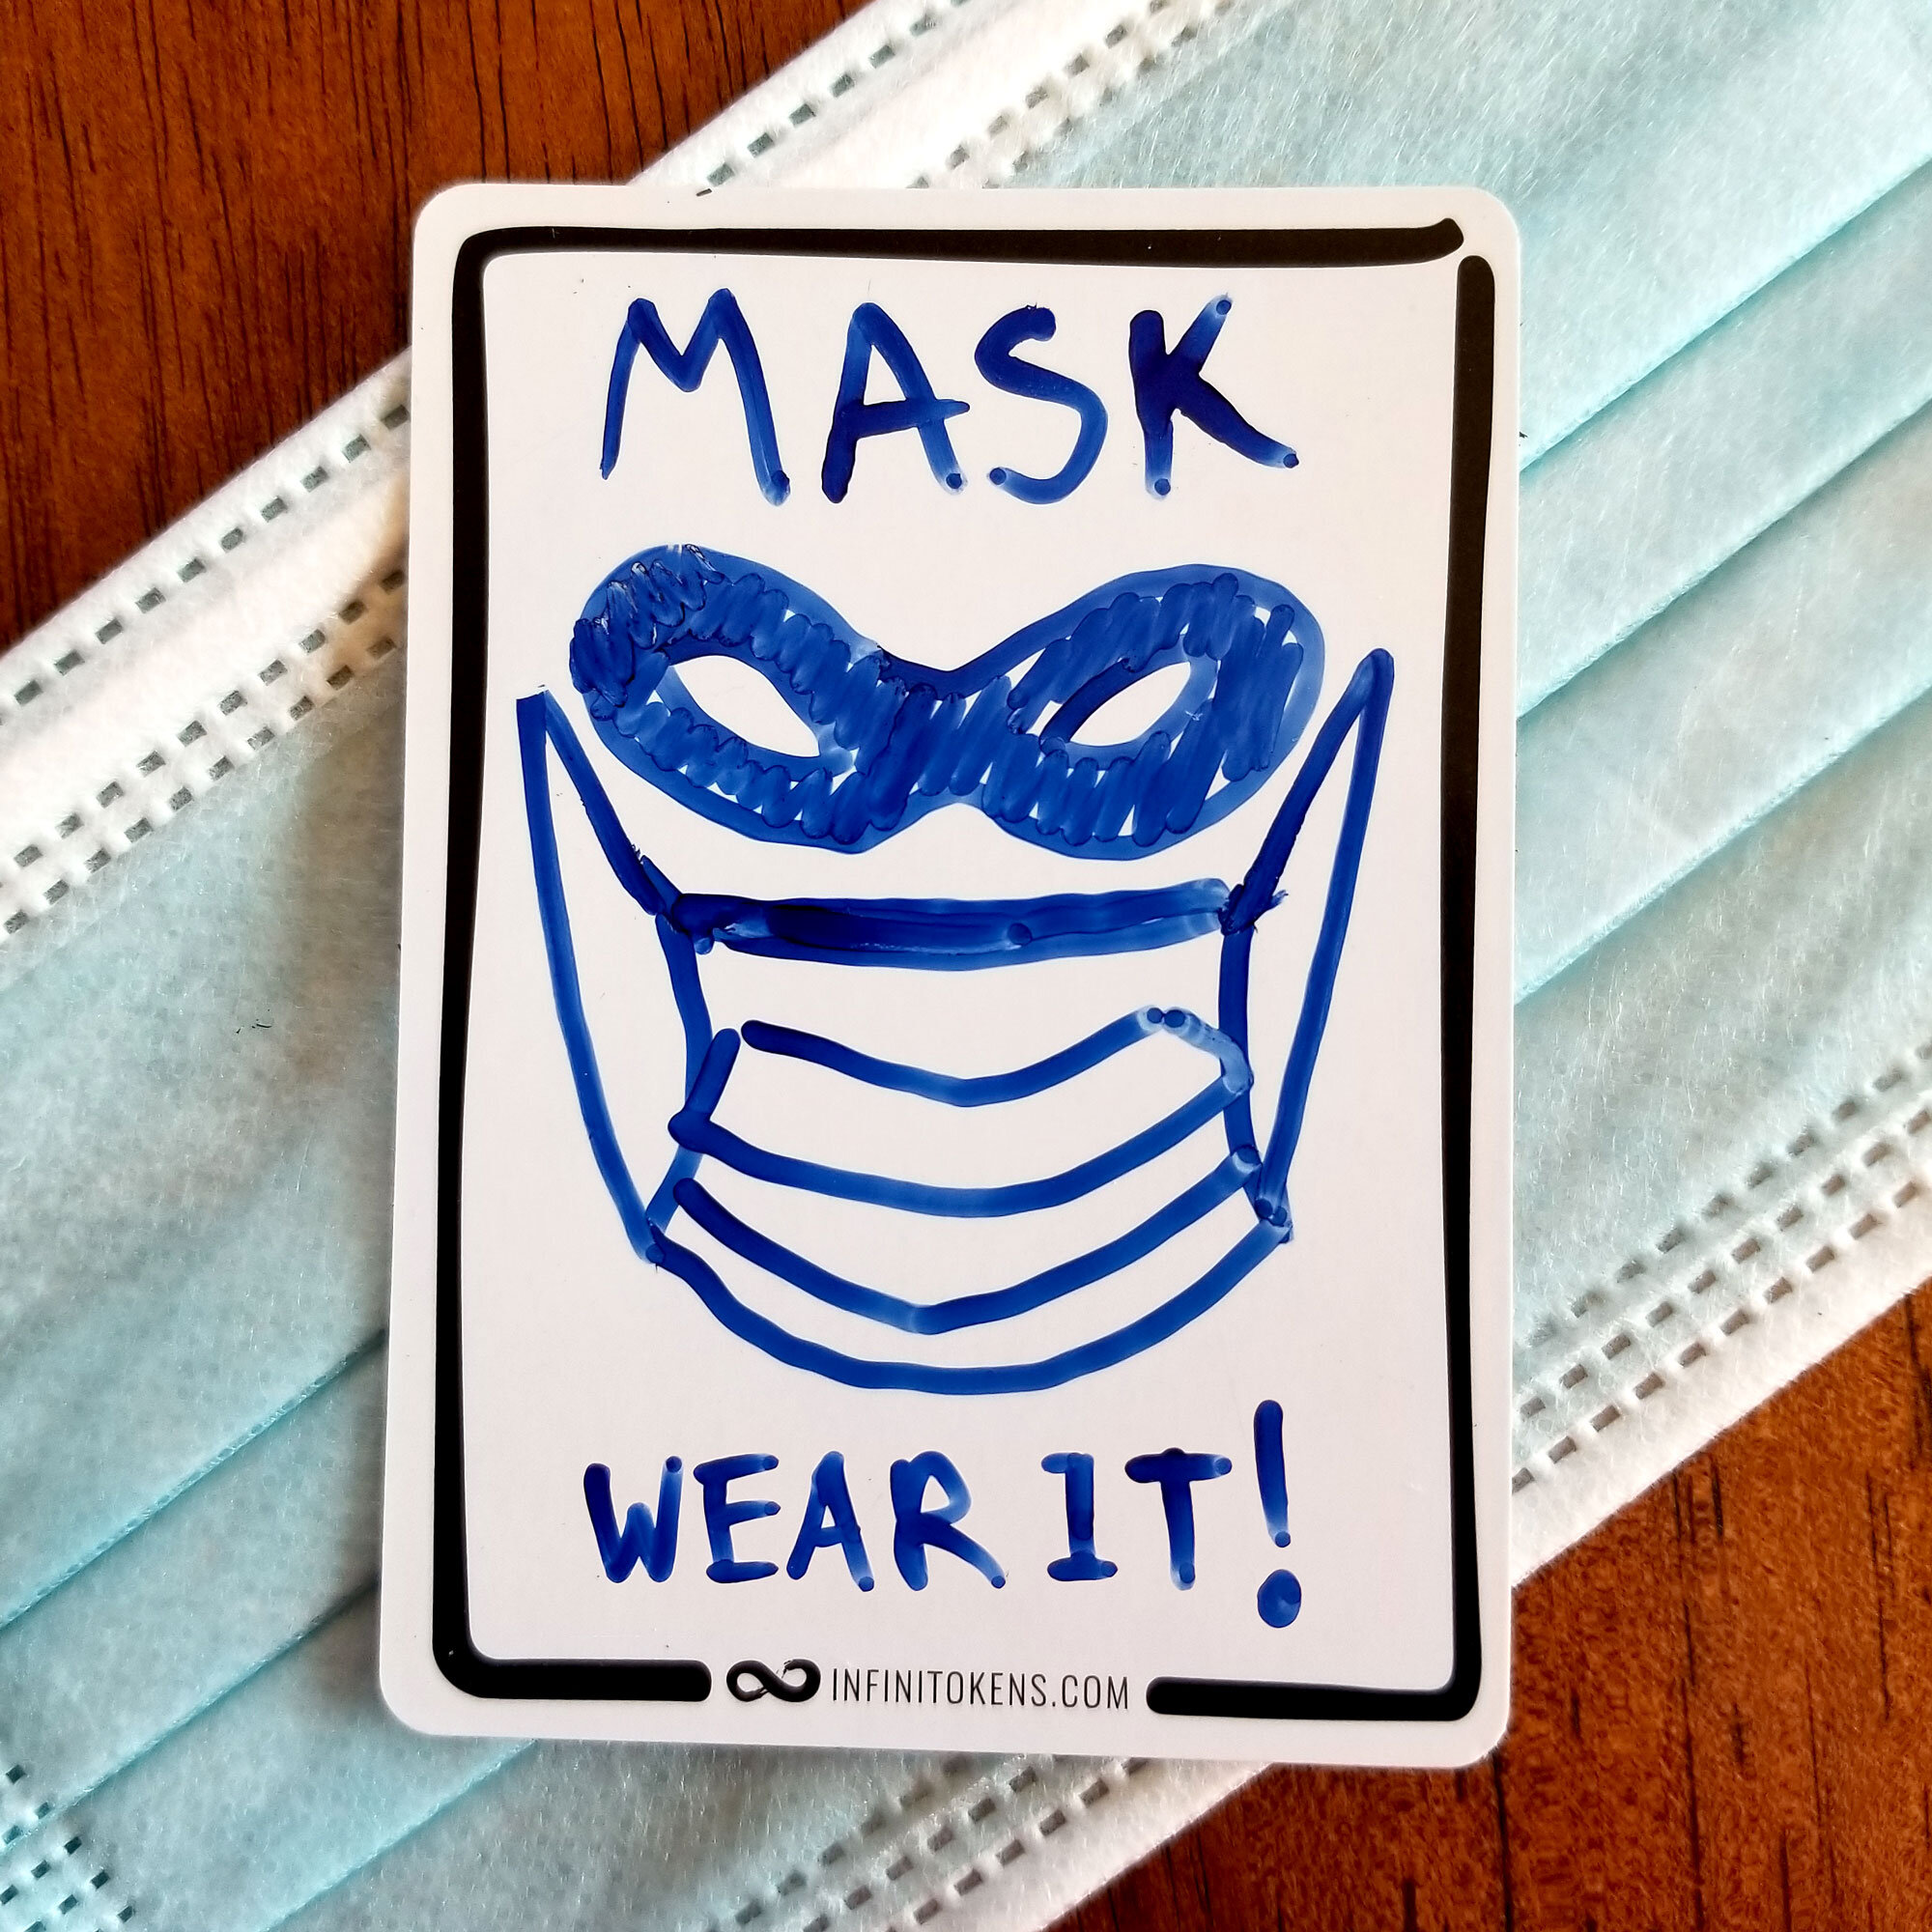 Day 25 - Mask